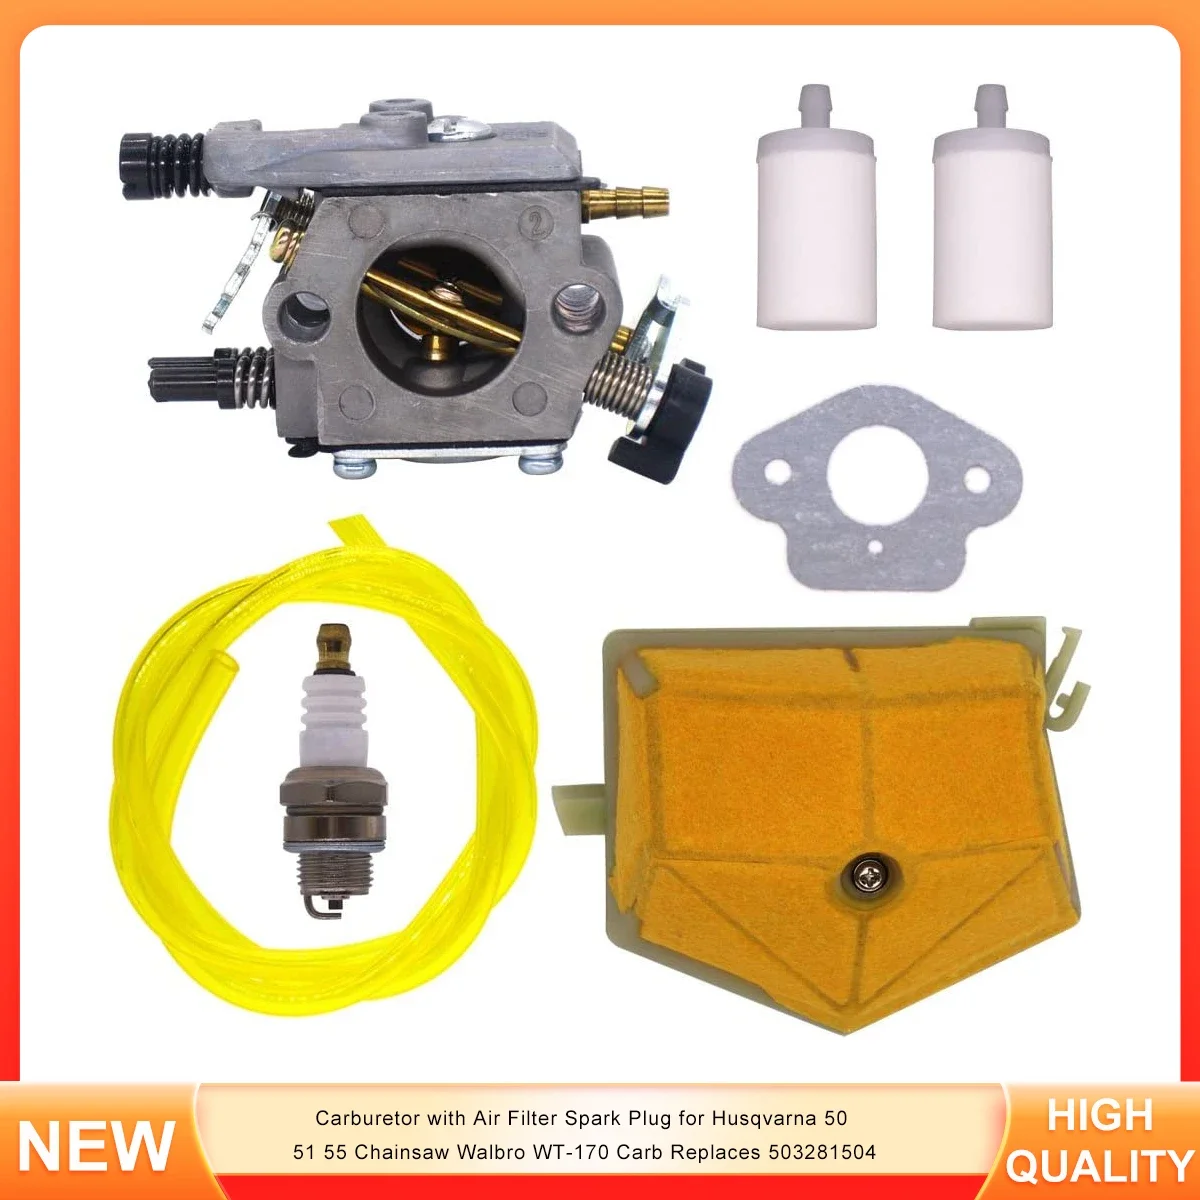 

Carburetor with Air Filter Spark Plug for Husqvarna 50 51 55 Chainsaw Walbro WT-170 Carb Replaces 503281504